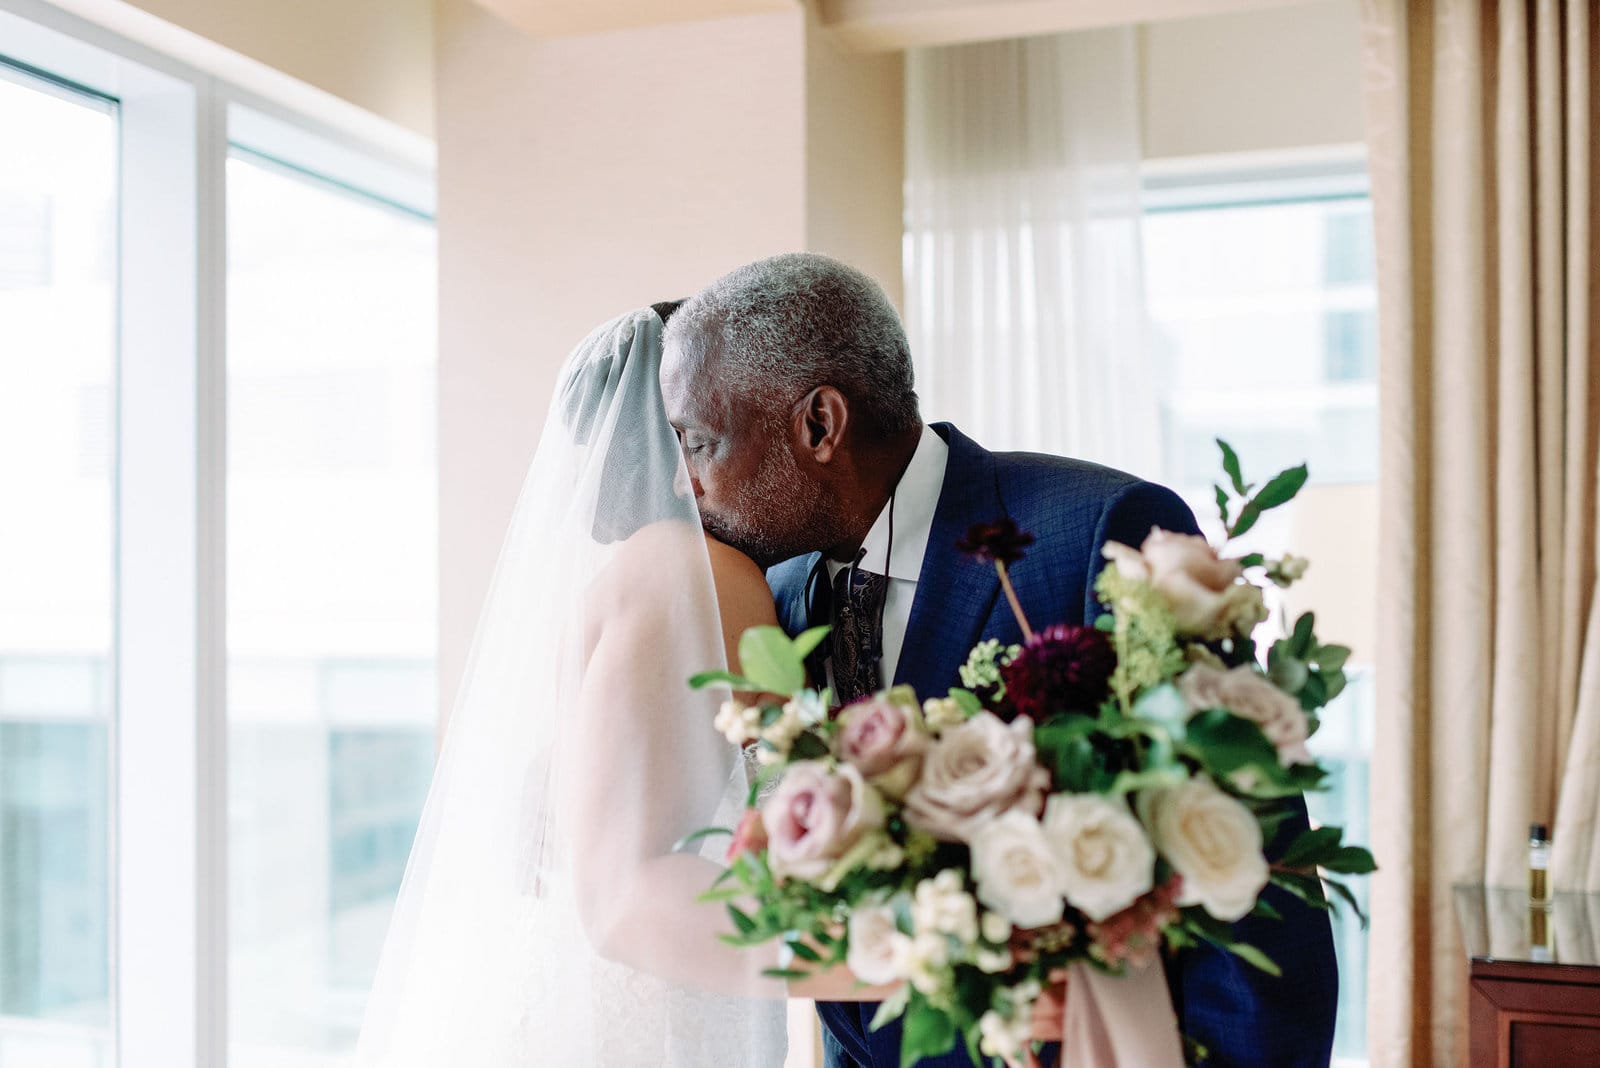 emotional father embraces bride on wedding day first look daughter featured by martha stewart weddings steam whistle wedding toronto wedding venue jacqueline james photography